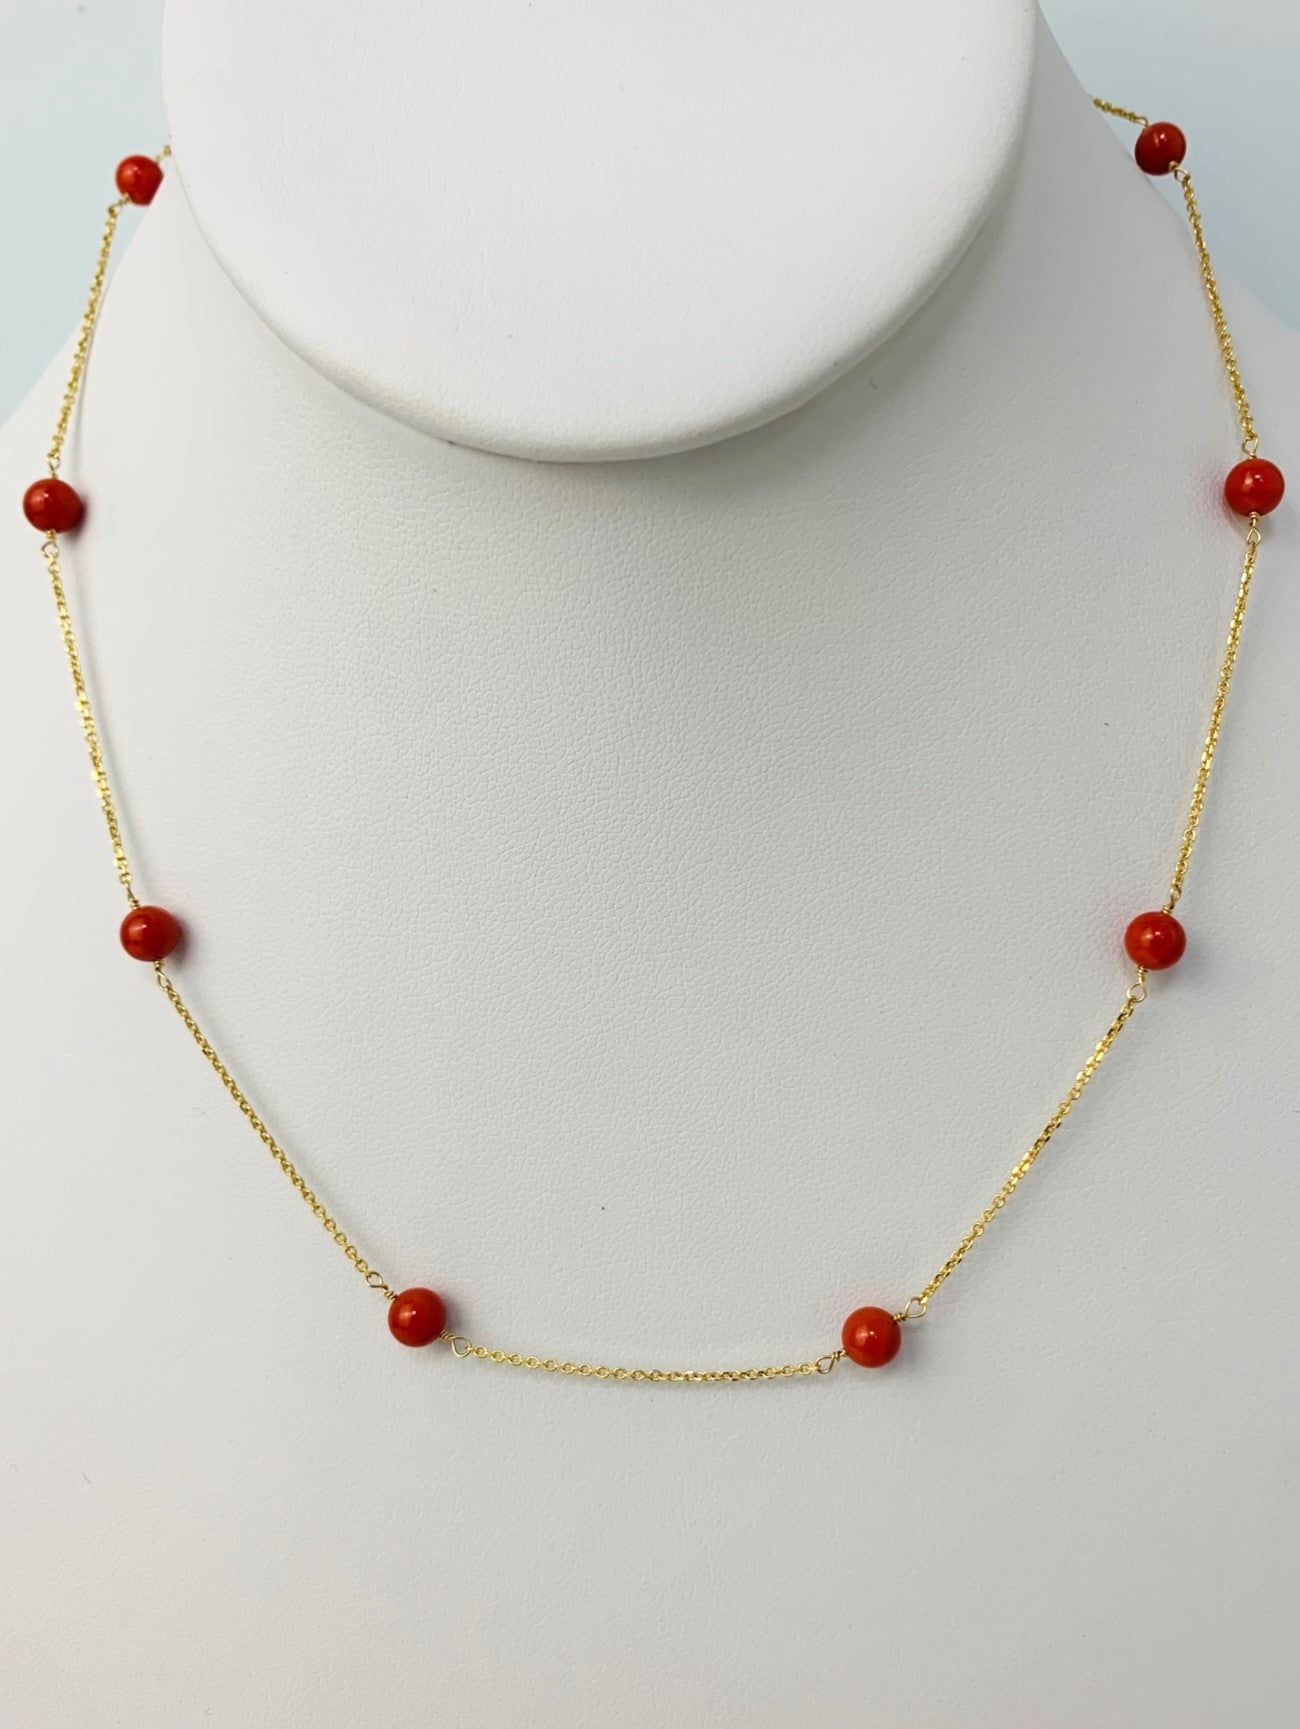 16" Coral Station Necklace in 14KY - NCK-229-TNCGM14Y-CRL-16